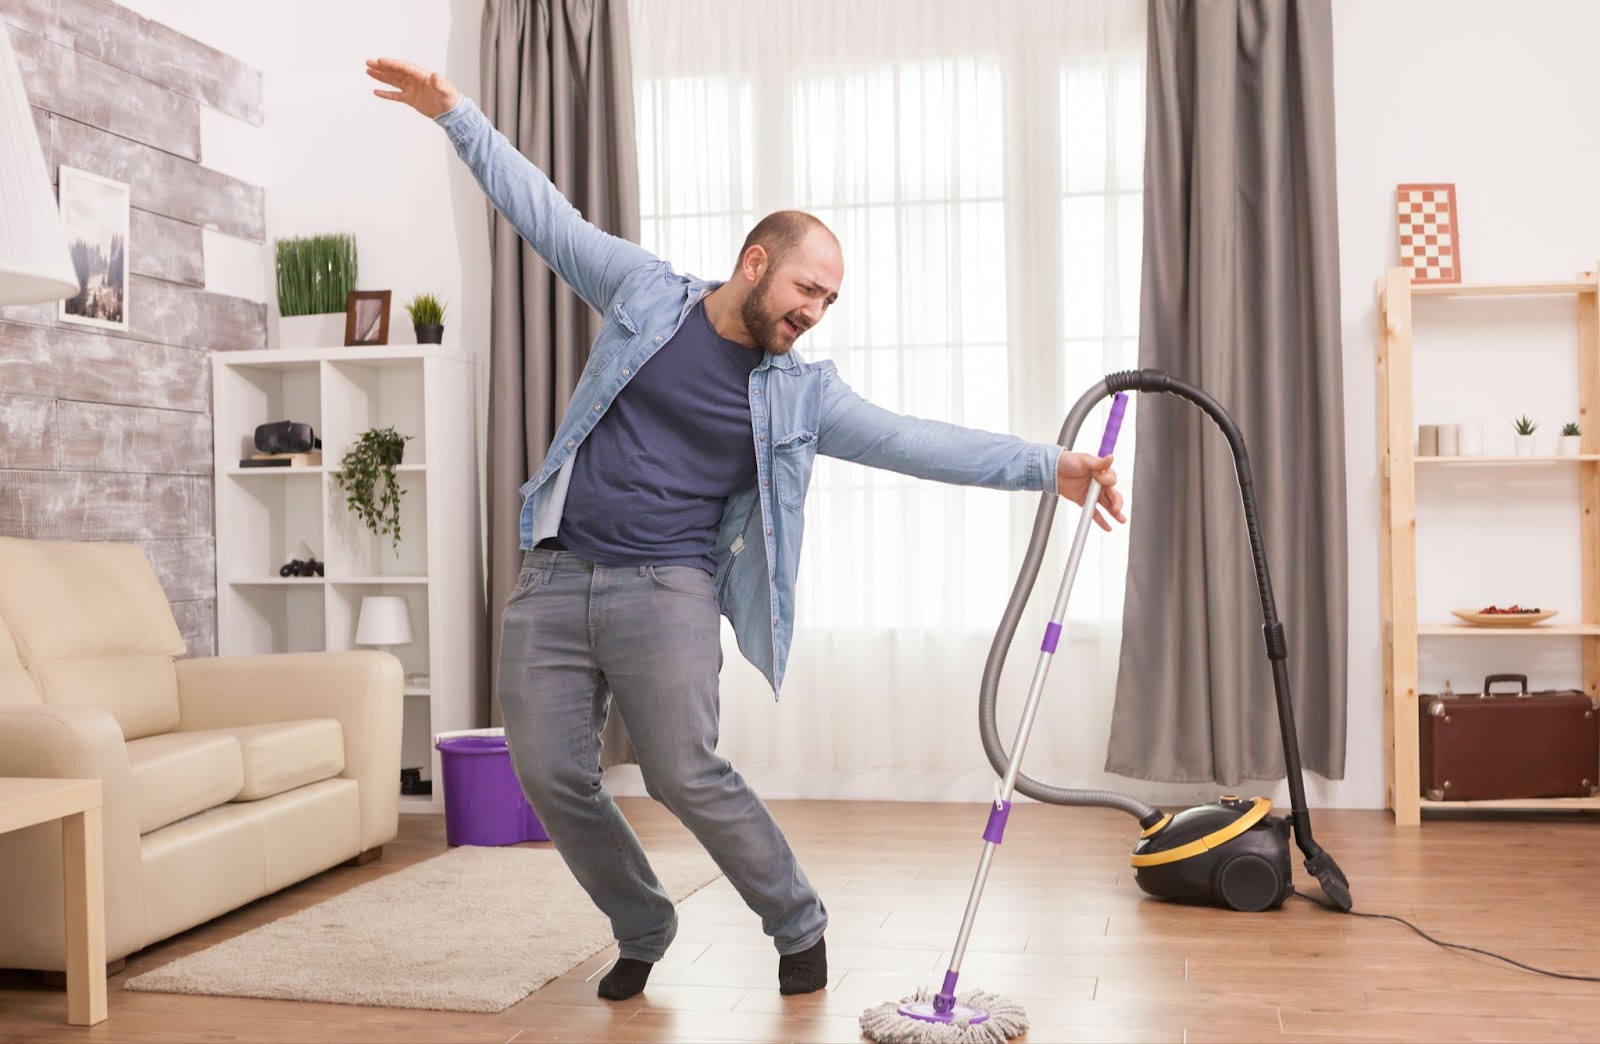 A man joyfully dances with a vacuum cleaner in a room. Pre-Cleaning Tips, Cleaning, Declutter